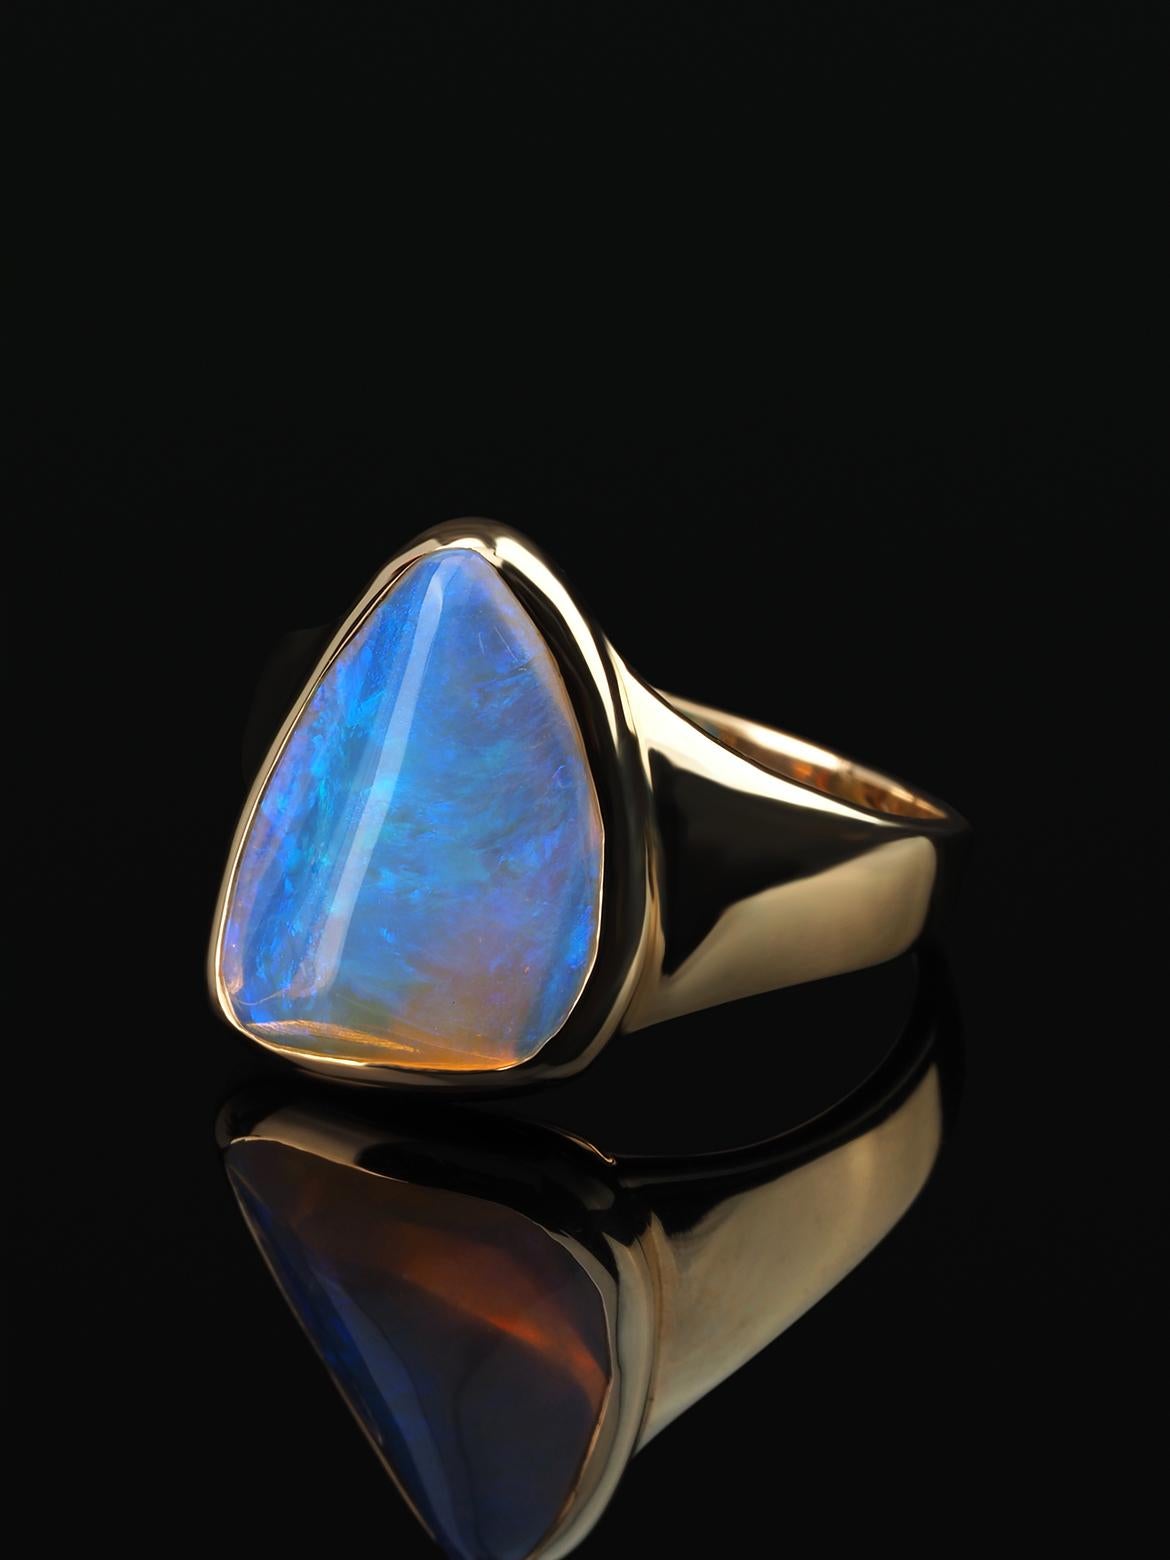 18K yellow gold ring with Natural Opal Crystal Pipe 
opal origin - Australia 
opal measurements - 0.2 х 0.39 х 0.55 in / 5 х 10 х 14 mm
stone weight - 3.5 carats
ring weight - 5.76 grams
ring size - 6.5 US

Minimal collection


We ship our jewelry